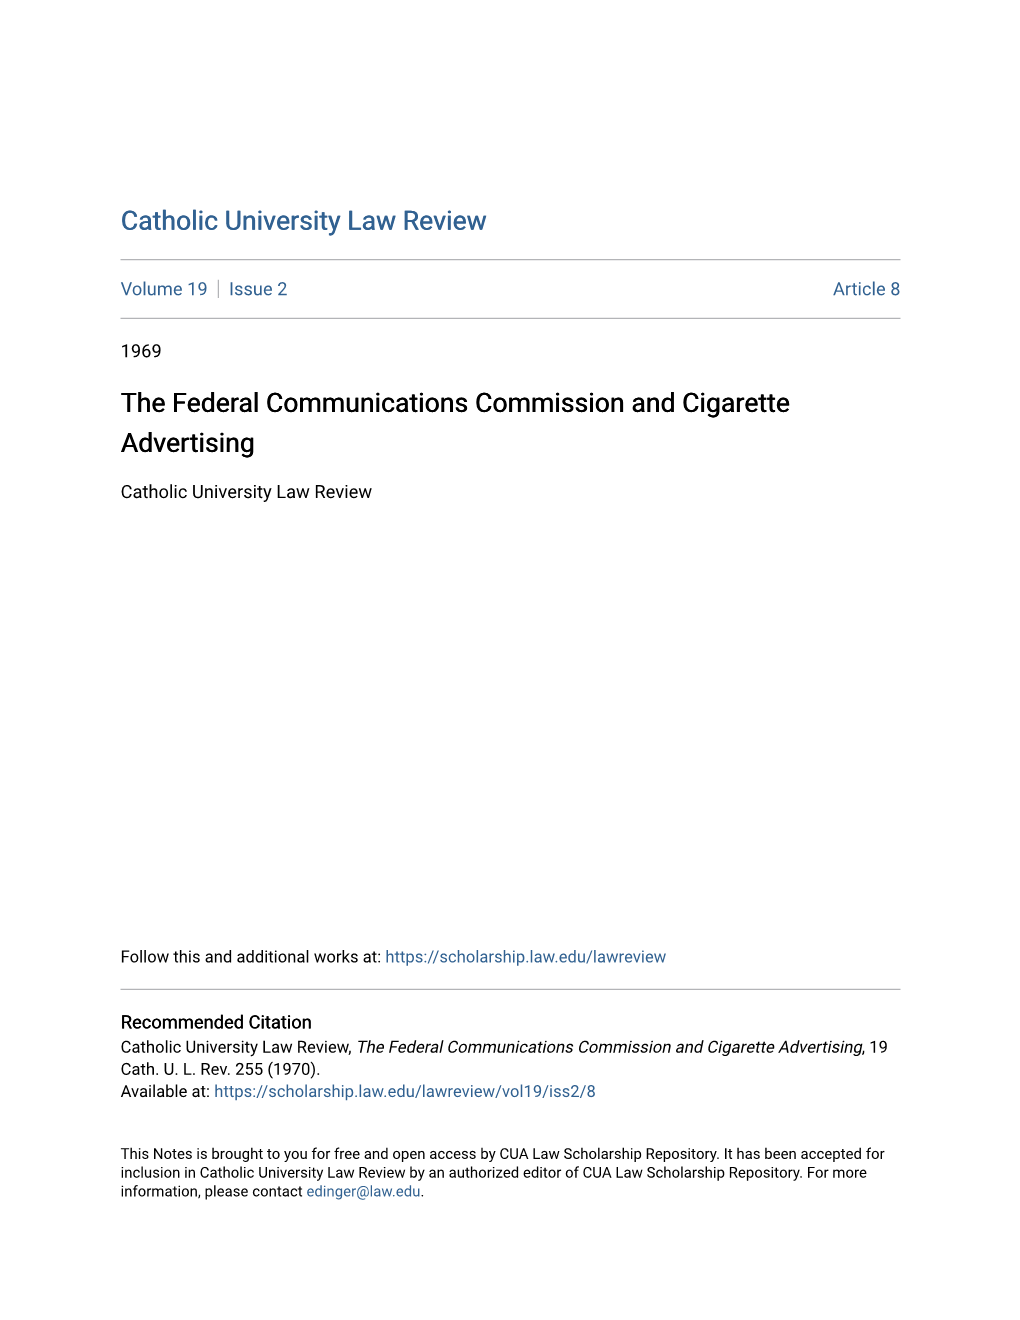 The Federal Communications Commission and Cigarette Advertising